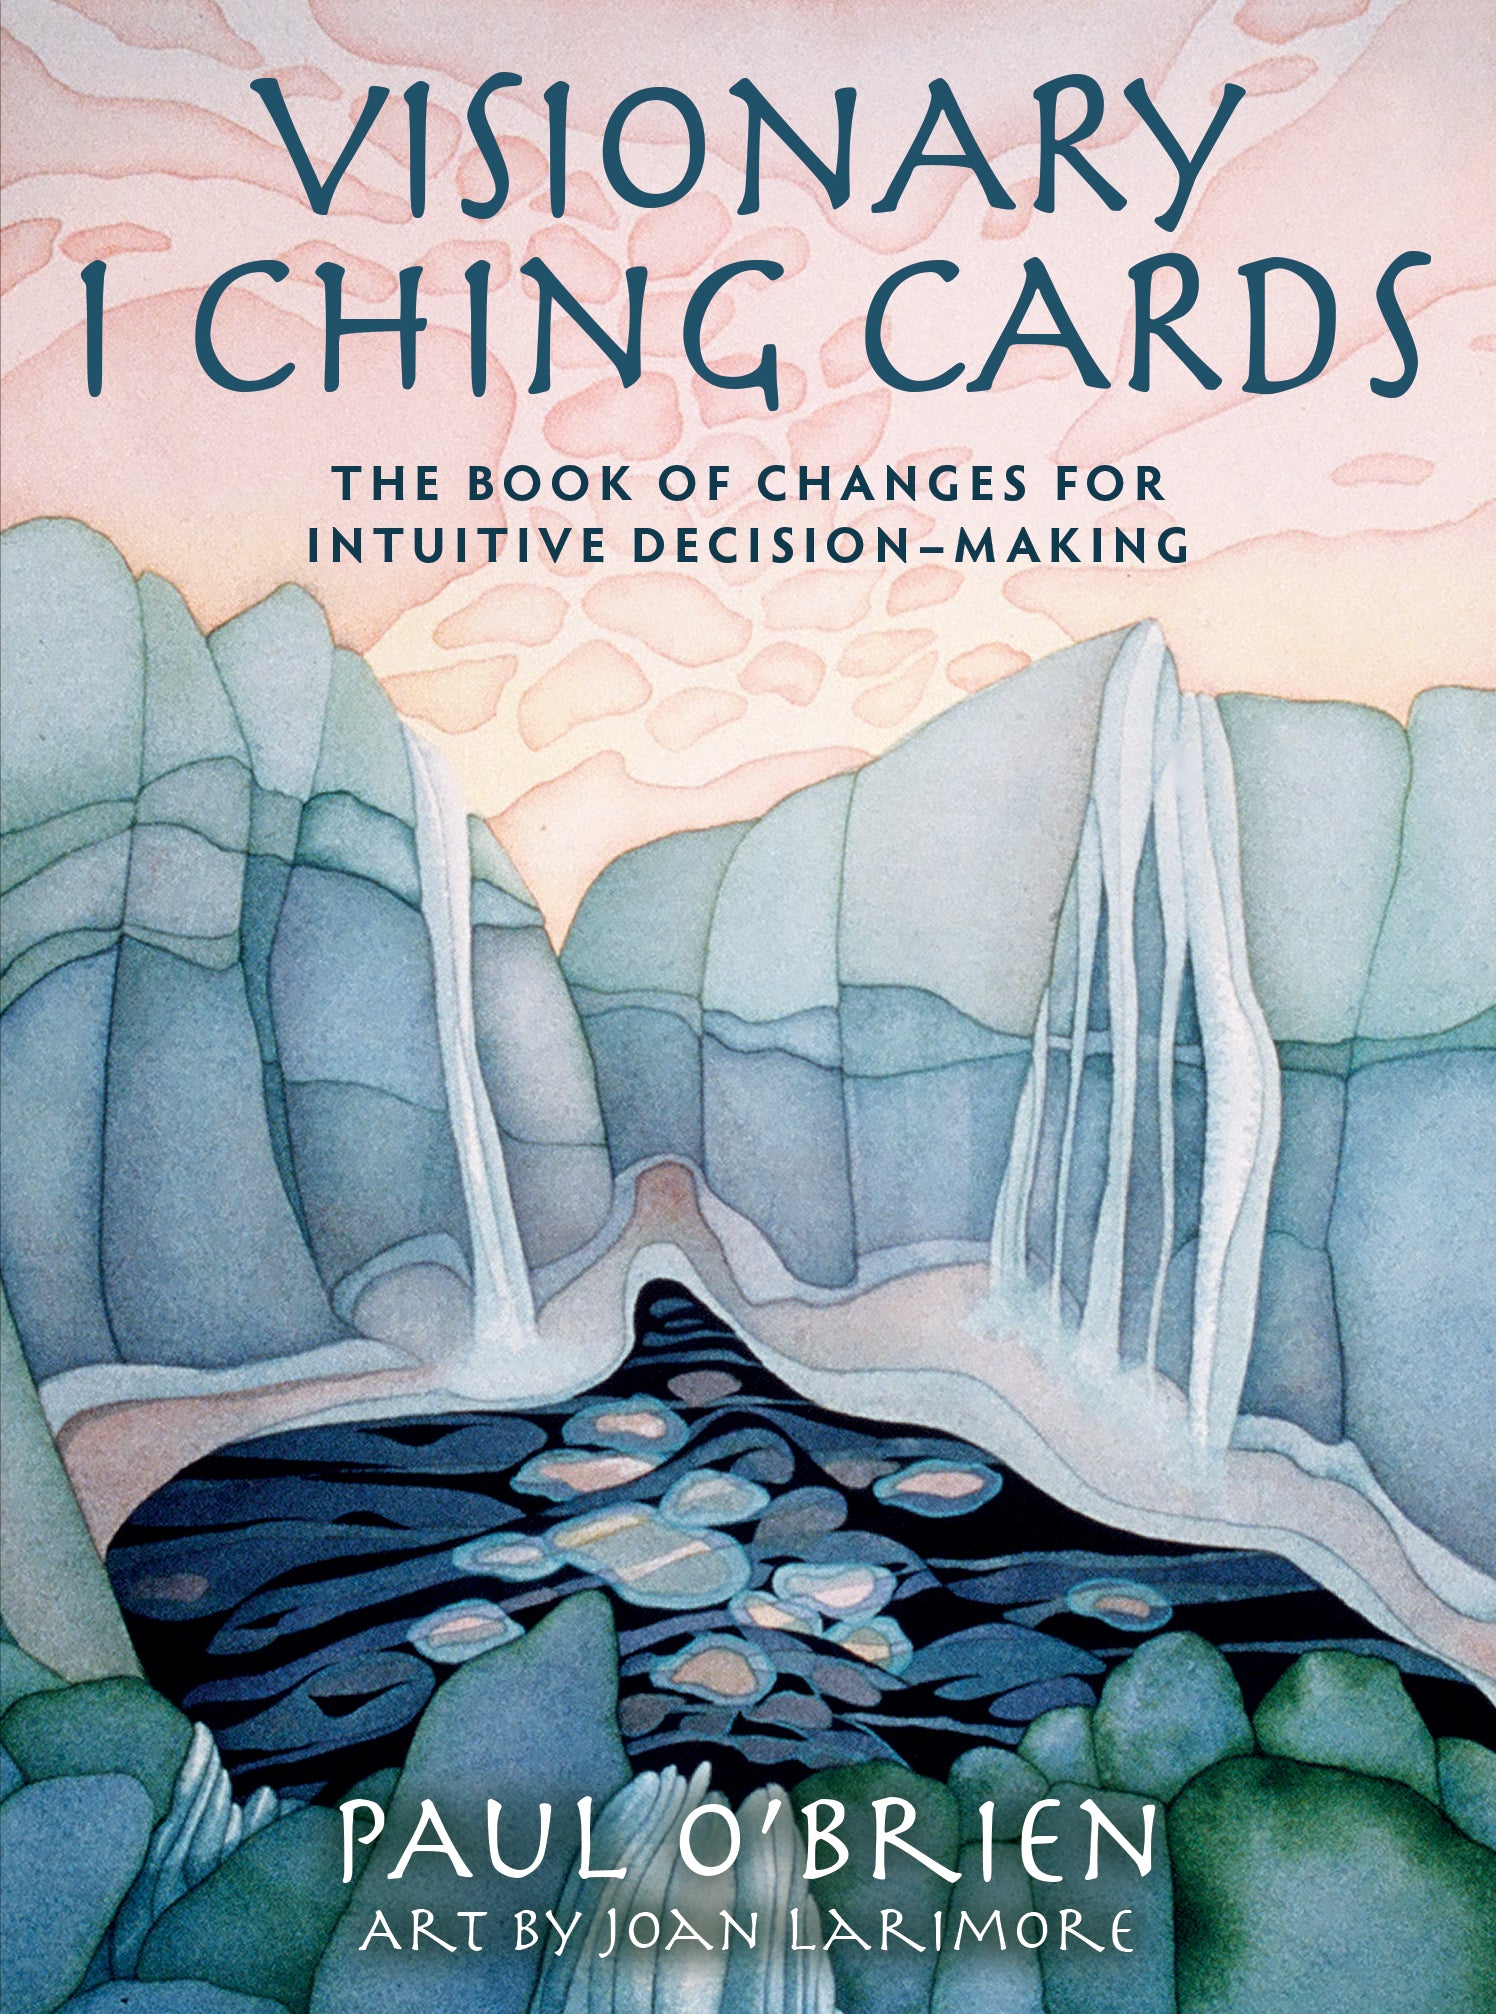 I-ching Tao Oracle deck review